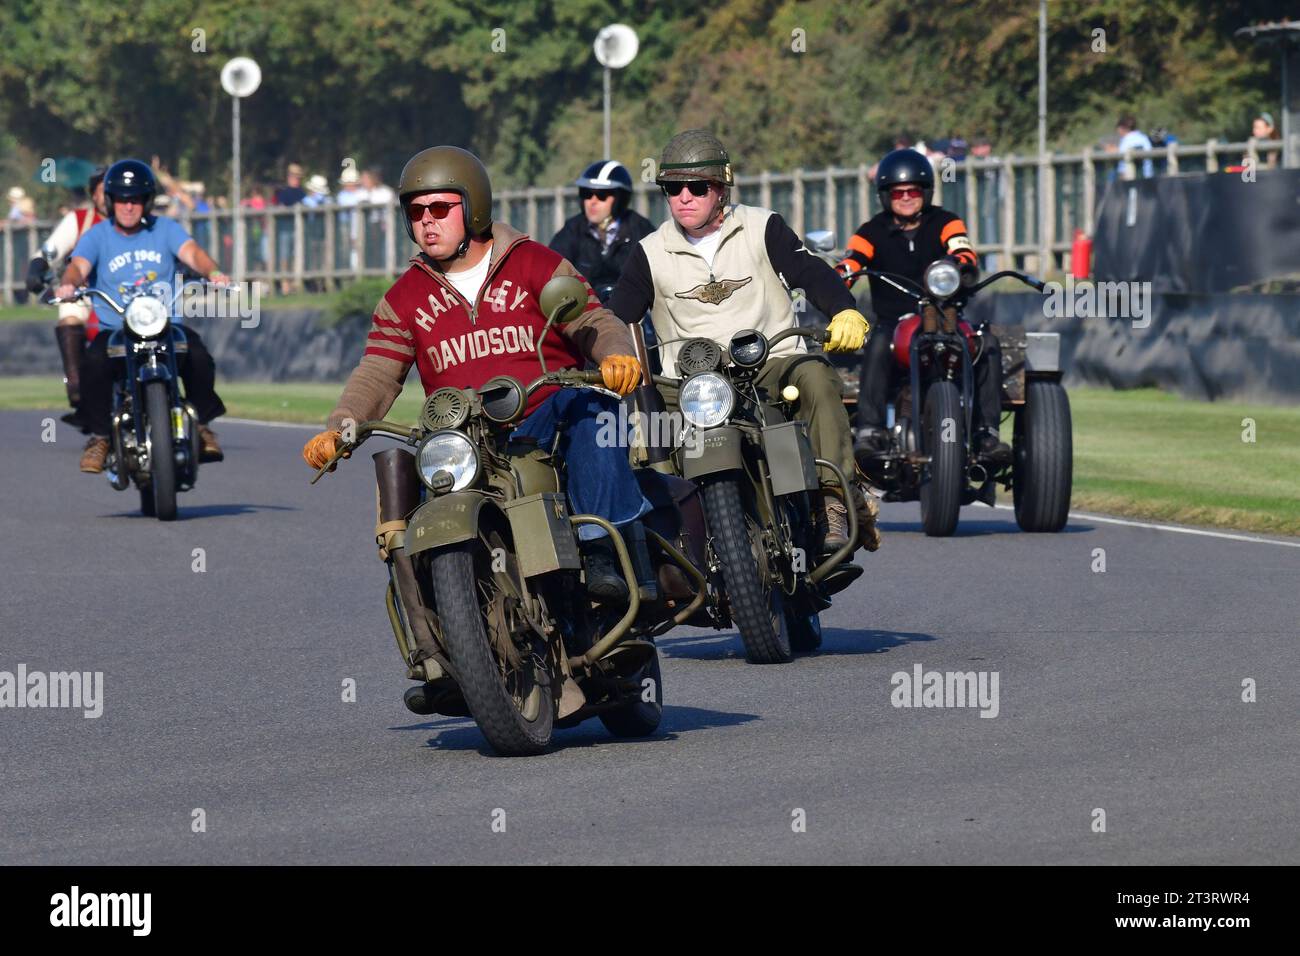 Military Harley Davidsons, Track Parade - Motorcycle Celebration, circa 200 bikes featured in the morning parade laps, including sidecar outfits and m Stock Photo